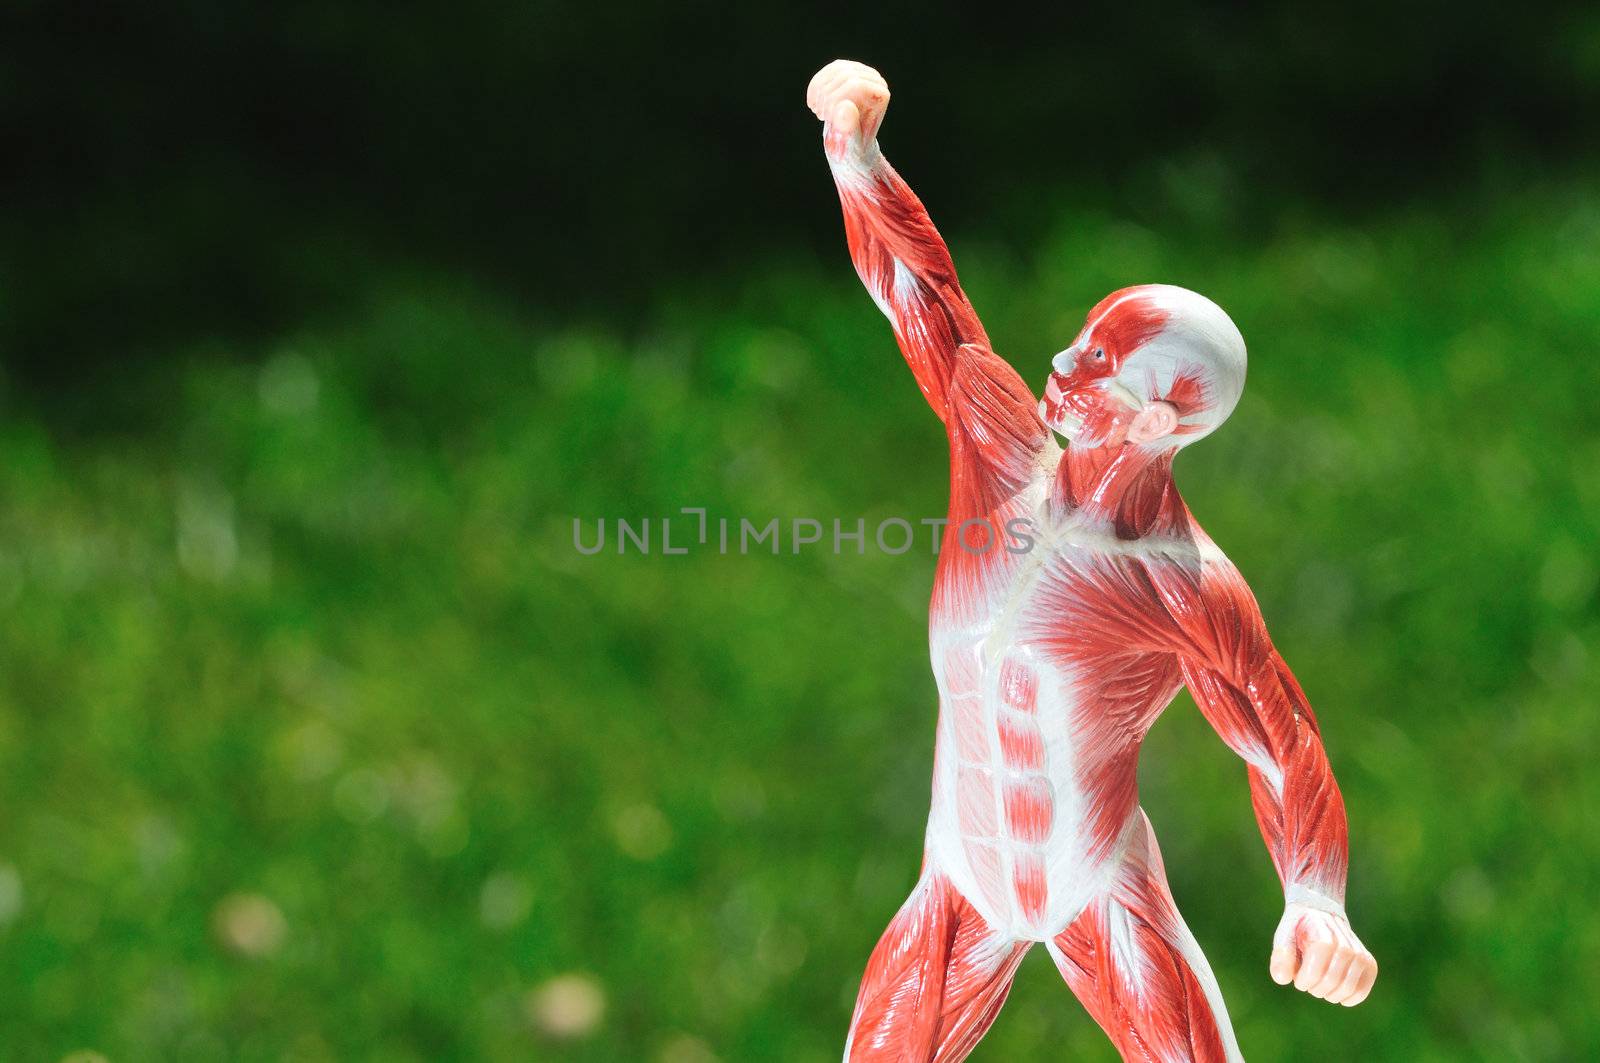 anatomical model of muscle and sinew in dramatic pose on green background